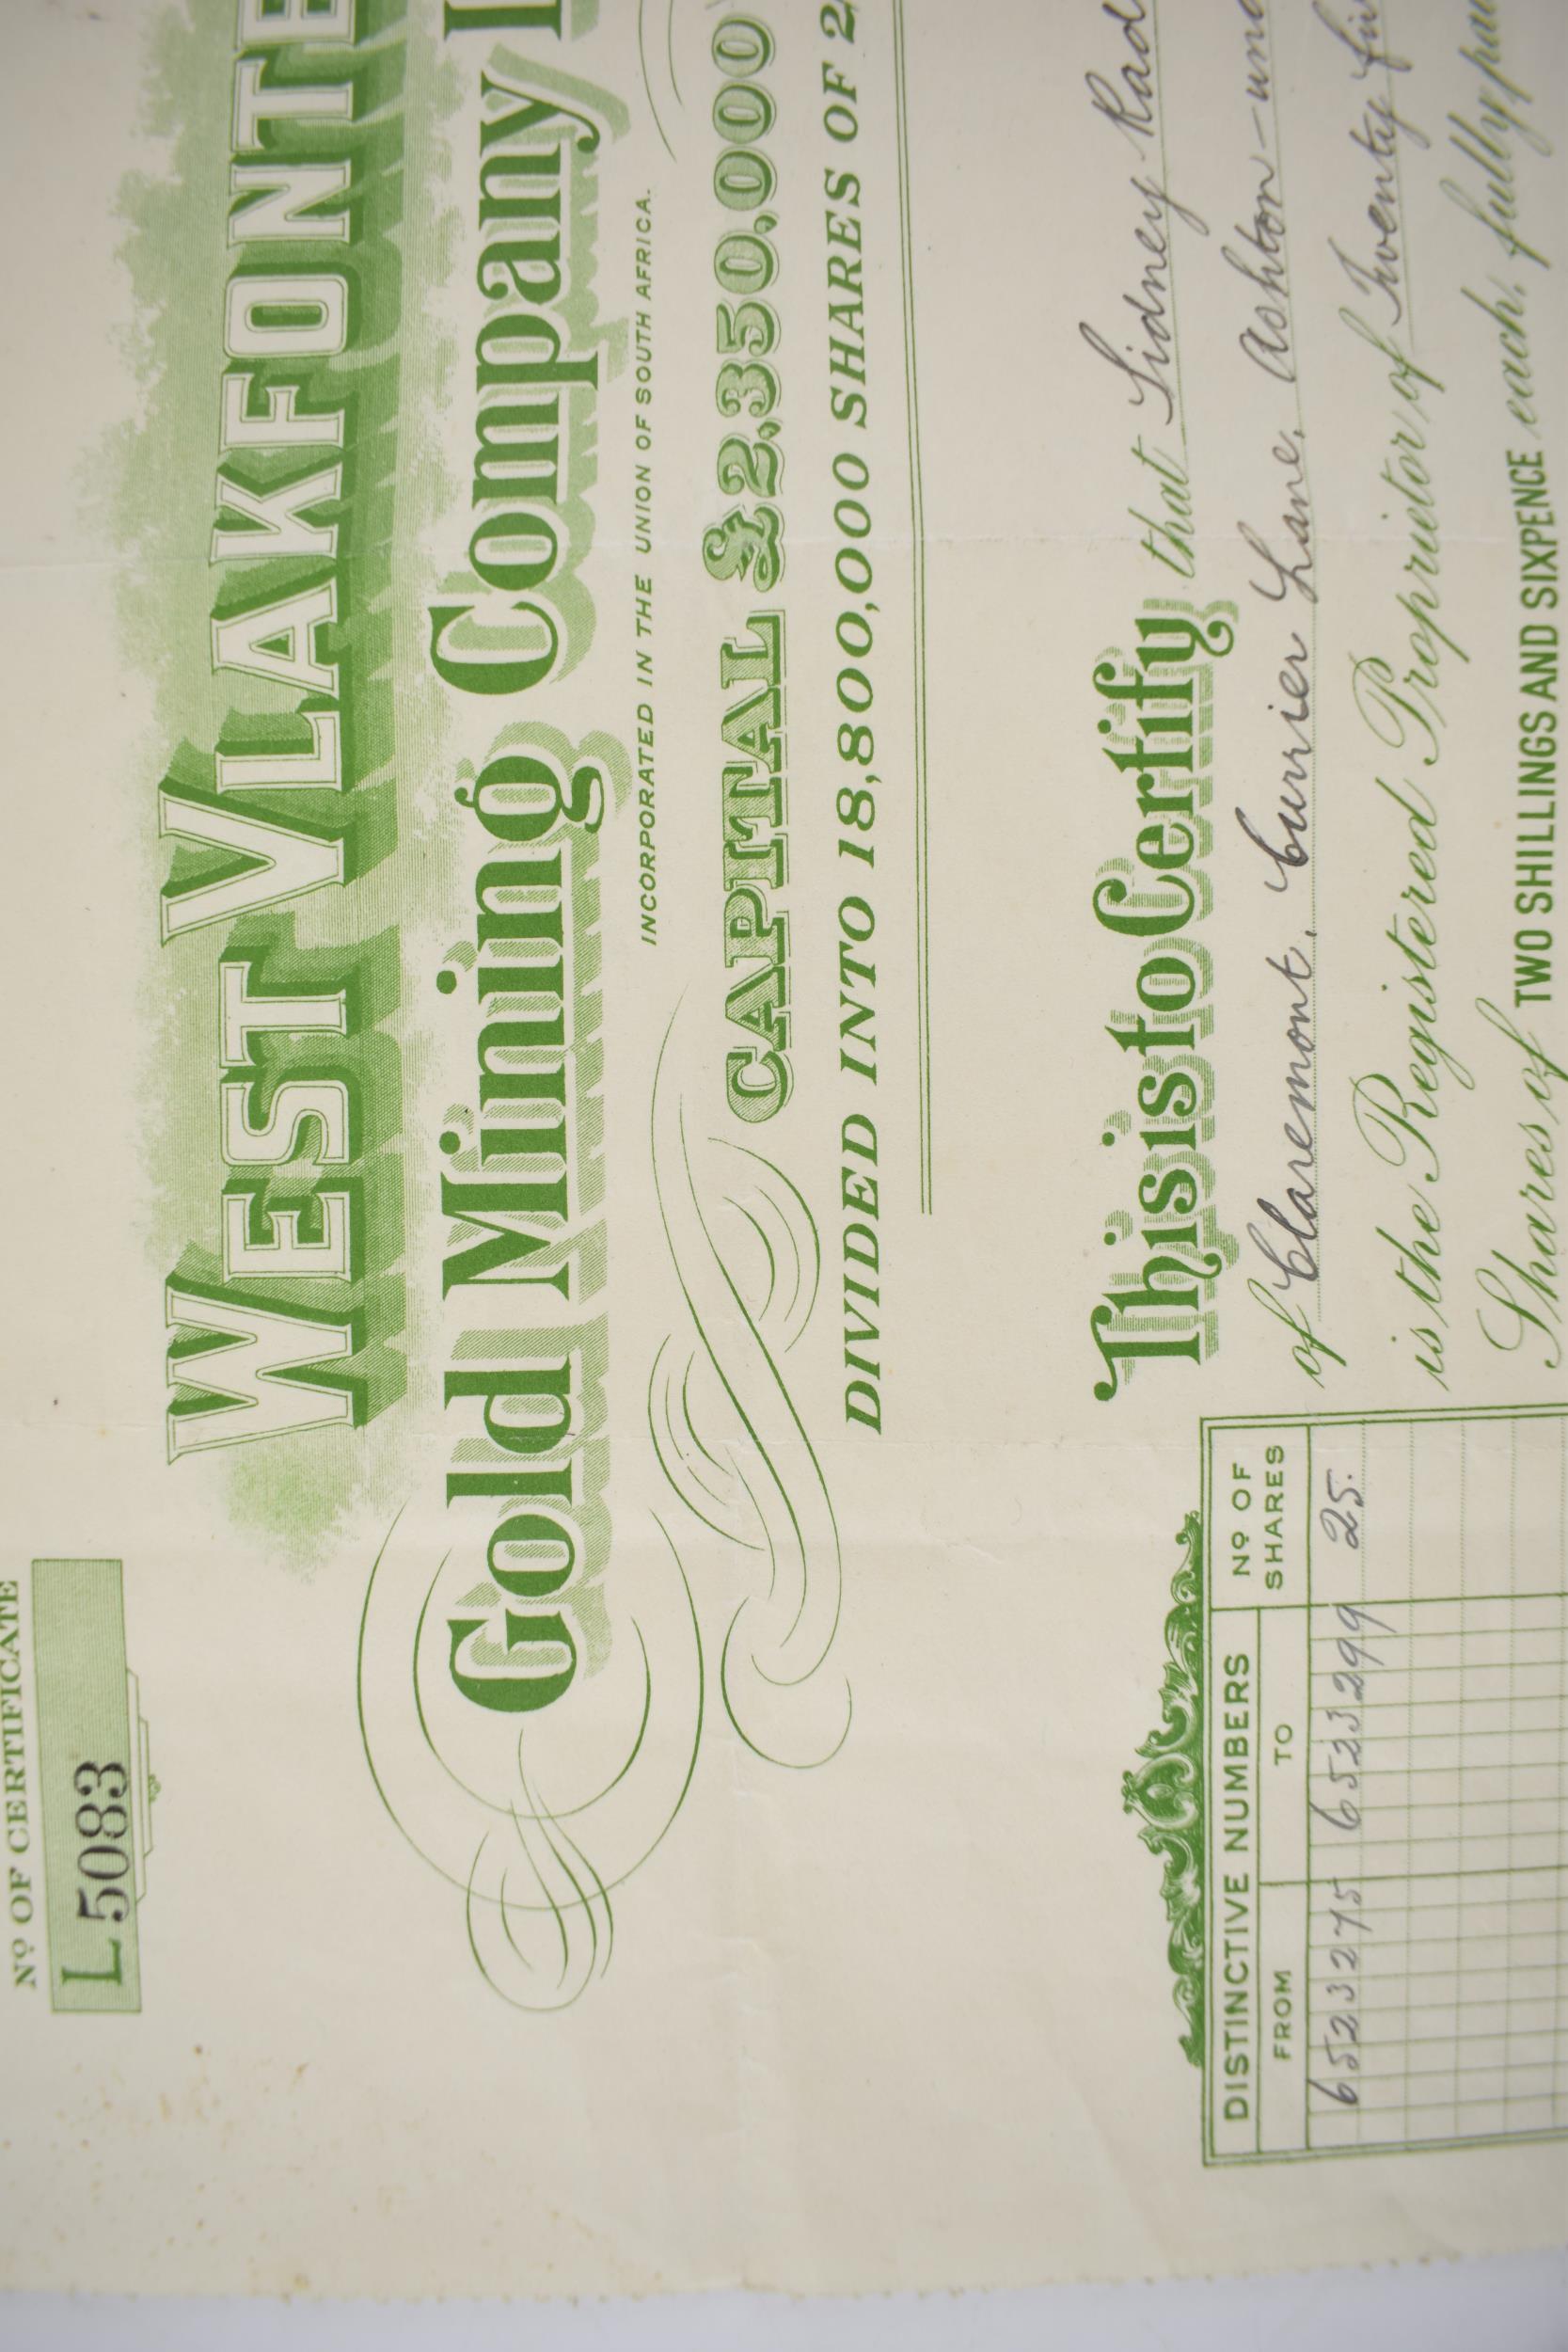 A WEST VLAKFONTEIN Gold Mining Company Limited Shares Certificated dated 10th November 1937. - Image 2 of 4